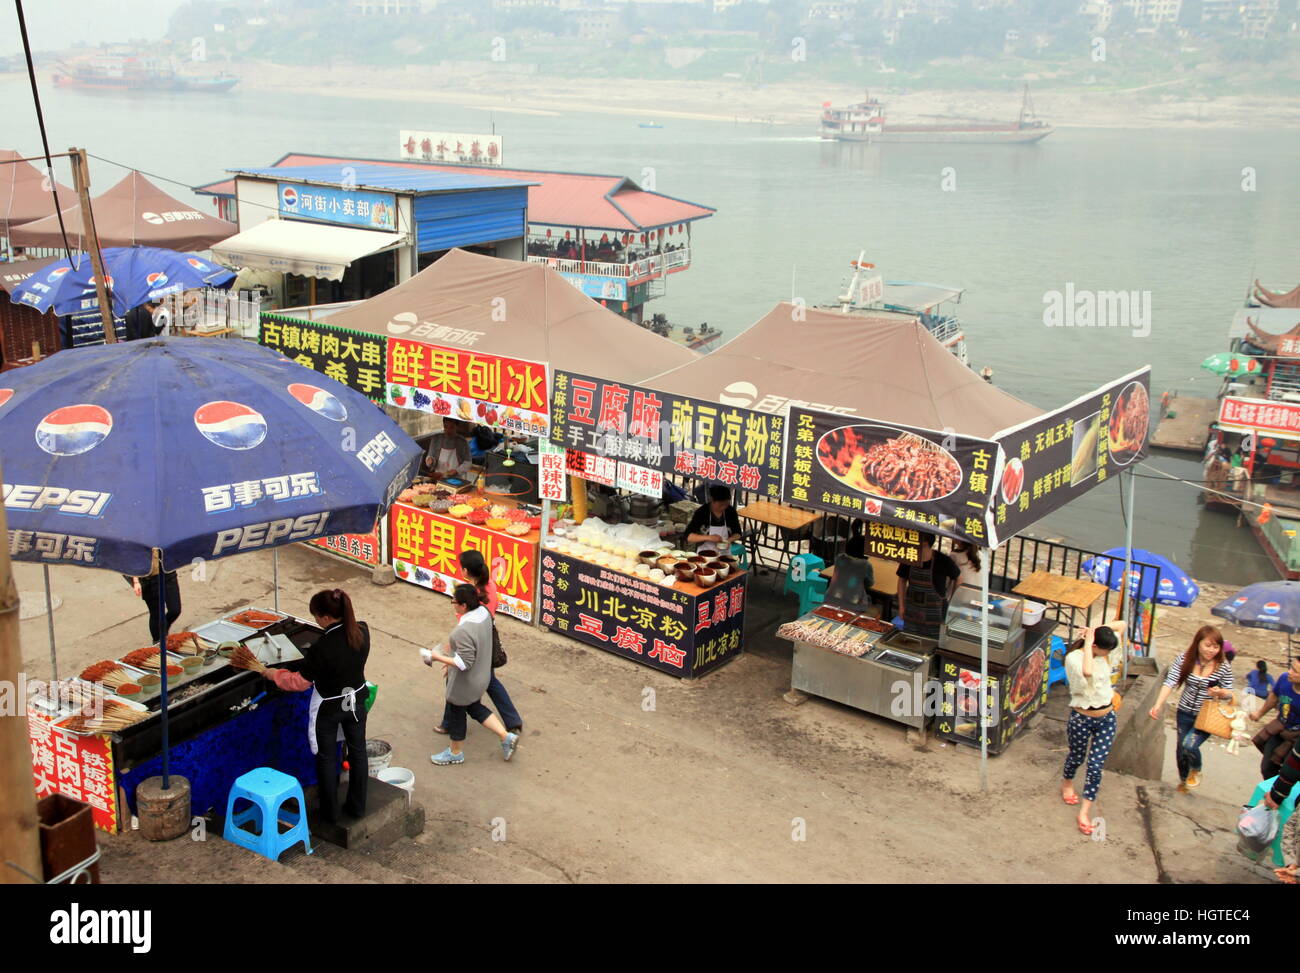 Street food stands on the Yangtze River in Chongqing, China Stock Photo